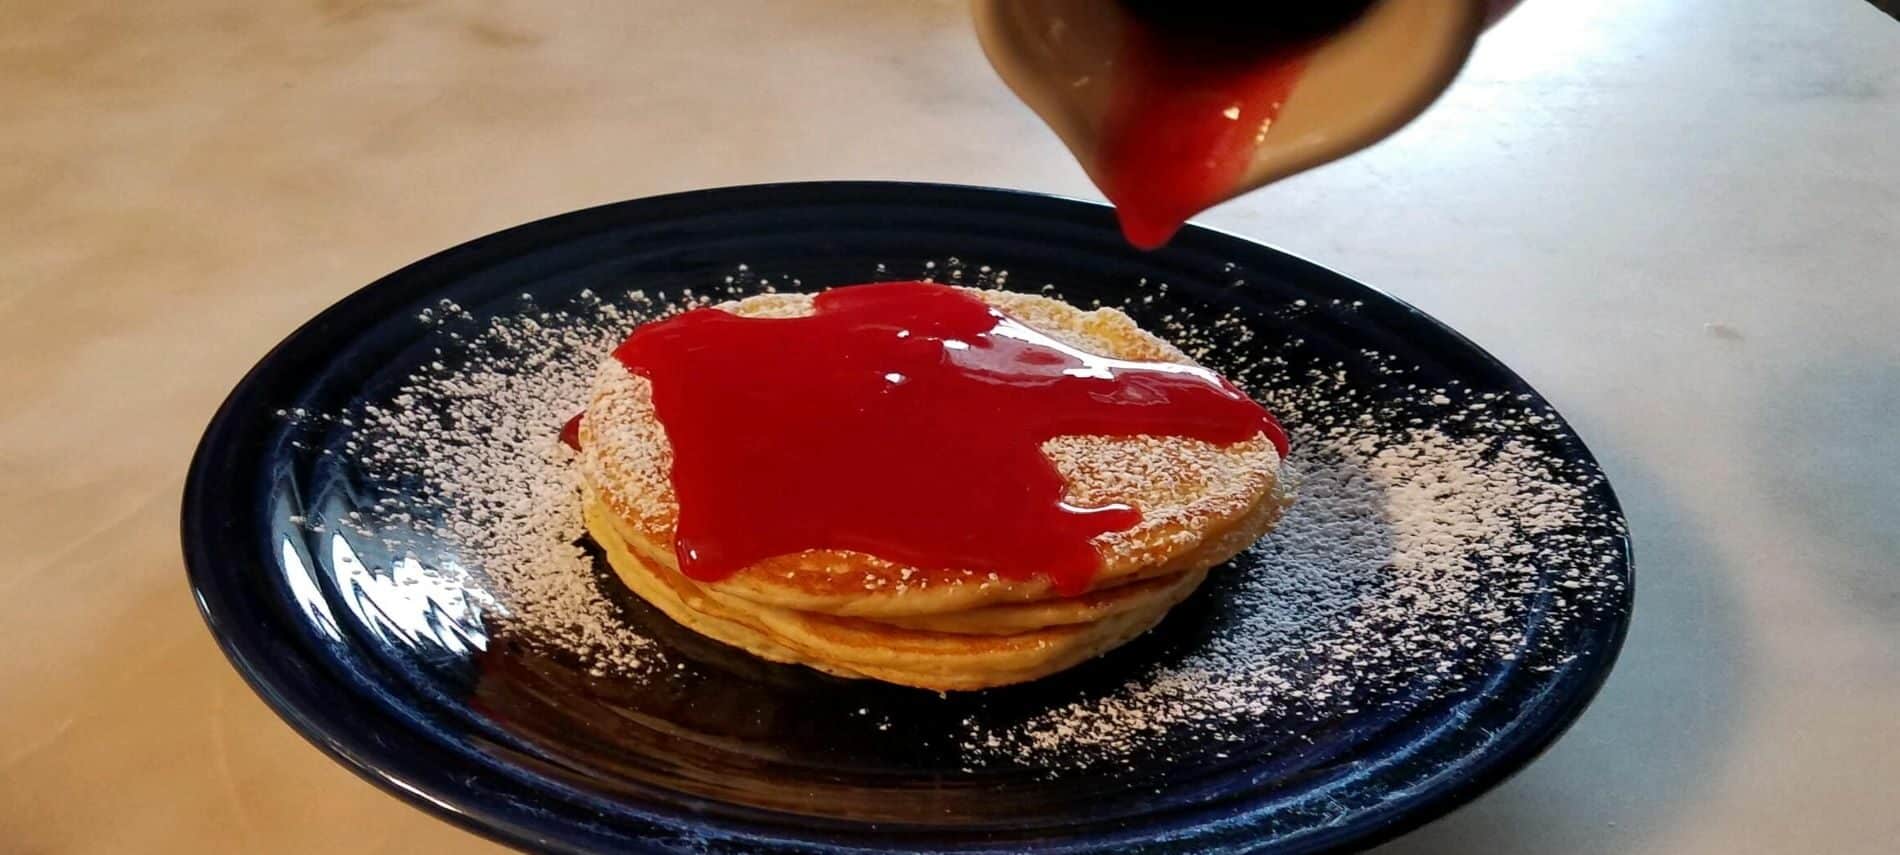 dark blue plate with golden brown pancakes with cranberry syrup poured from pitcher on top of pancakes